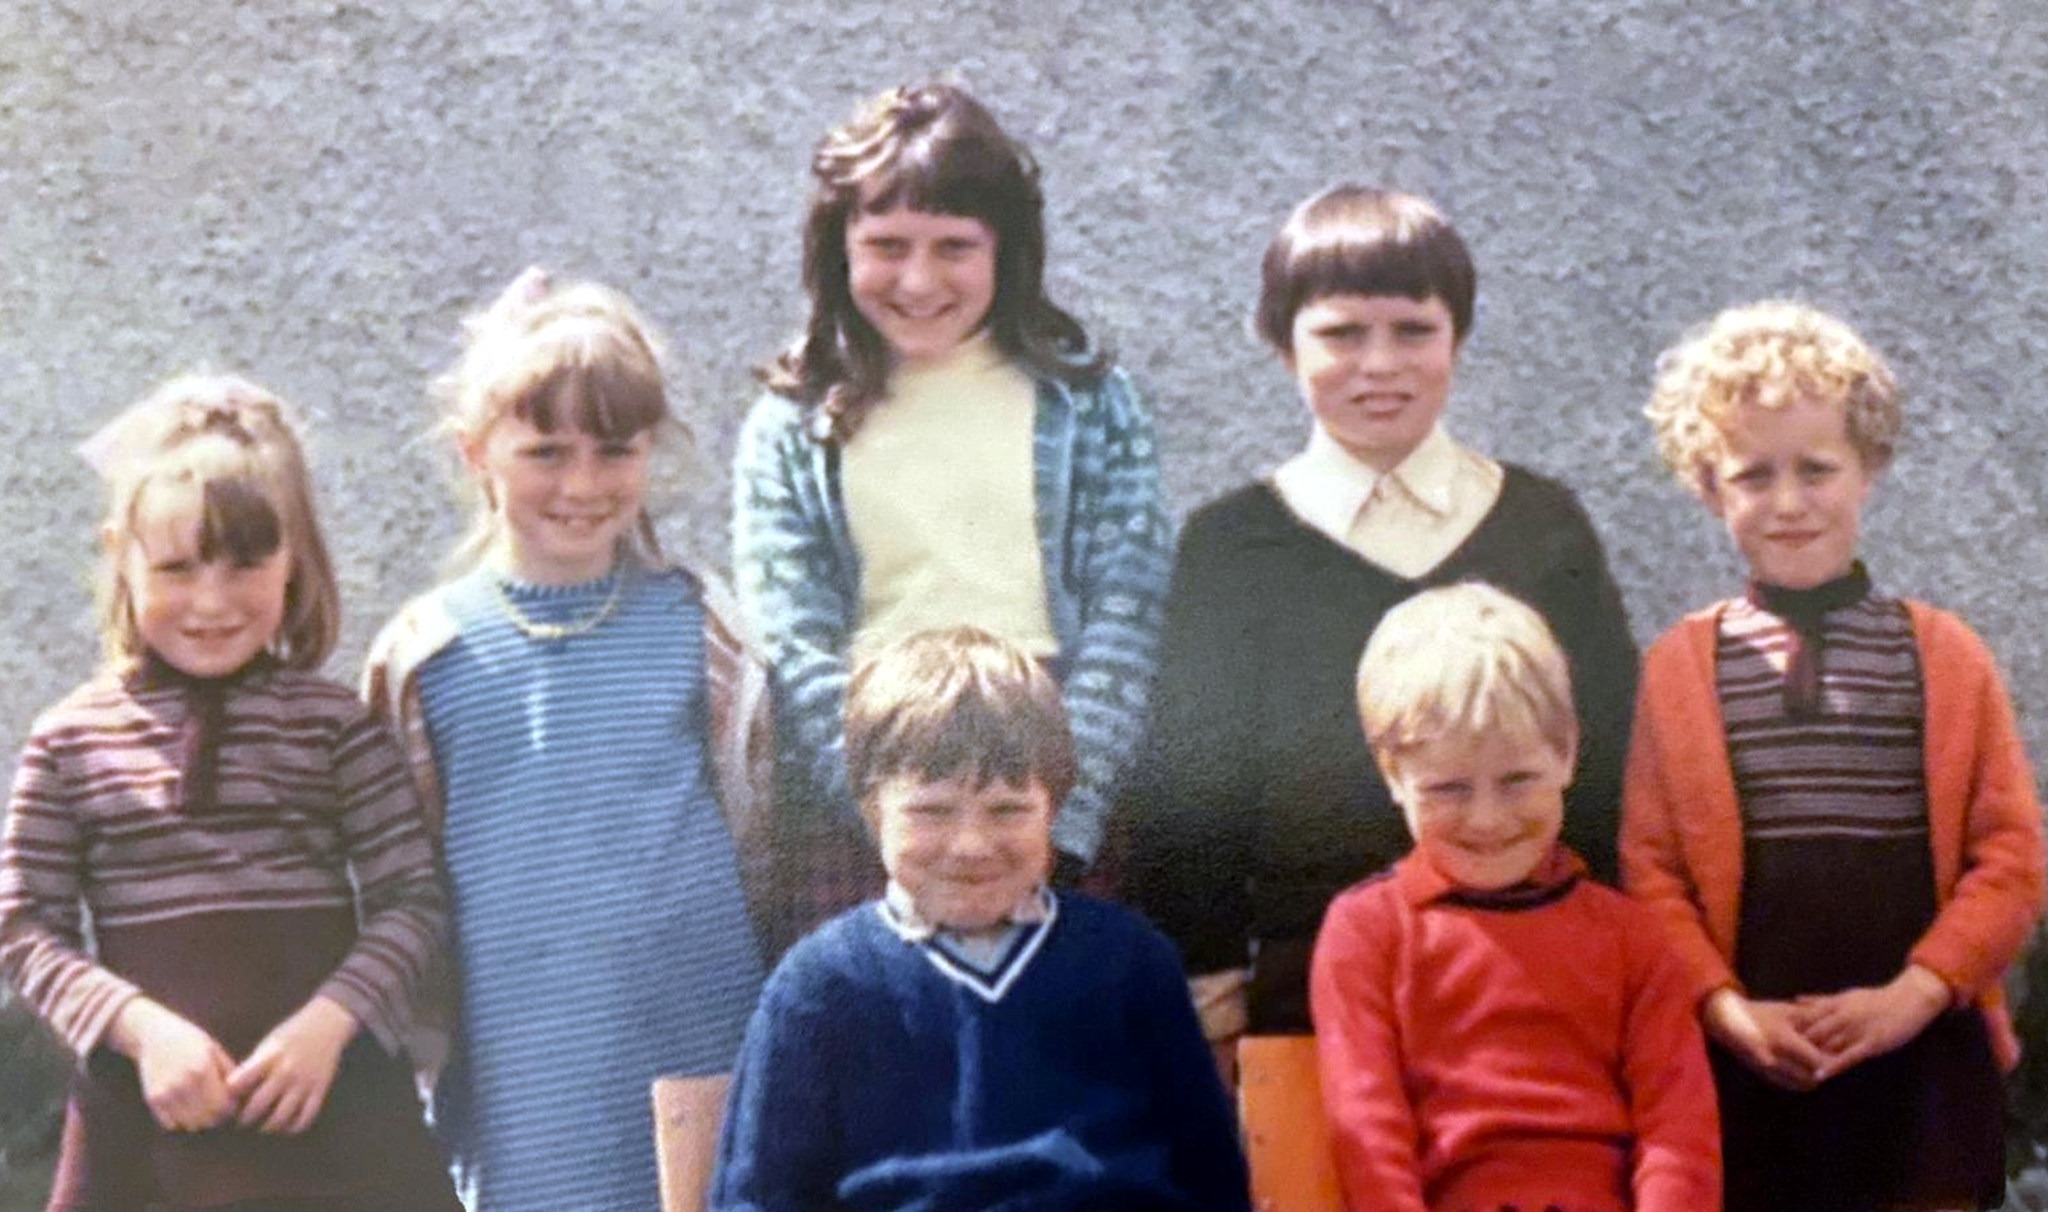 Jim Loughrey’s children pictured before his murder in 1976. (Photo: Supplied)